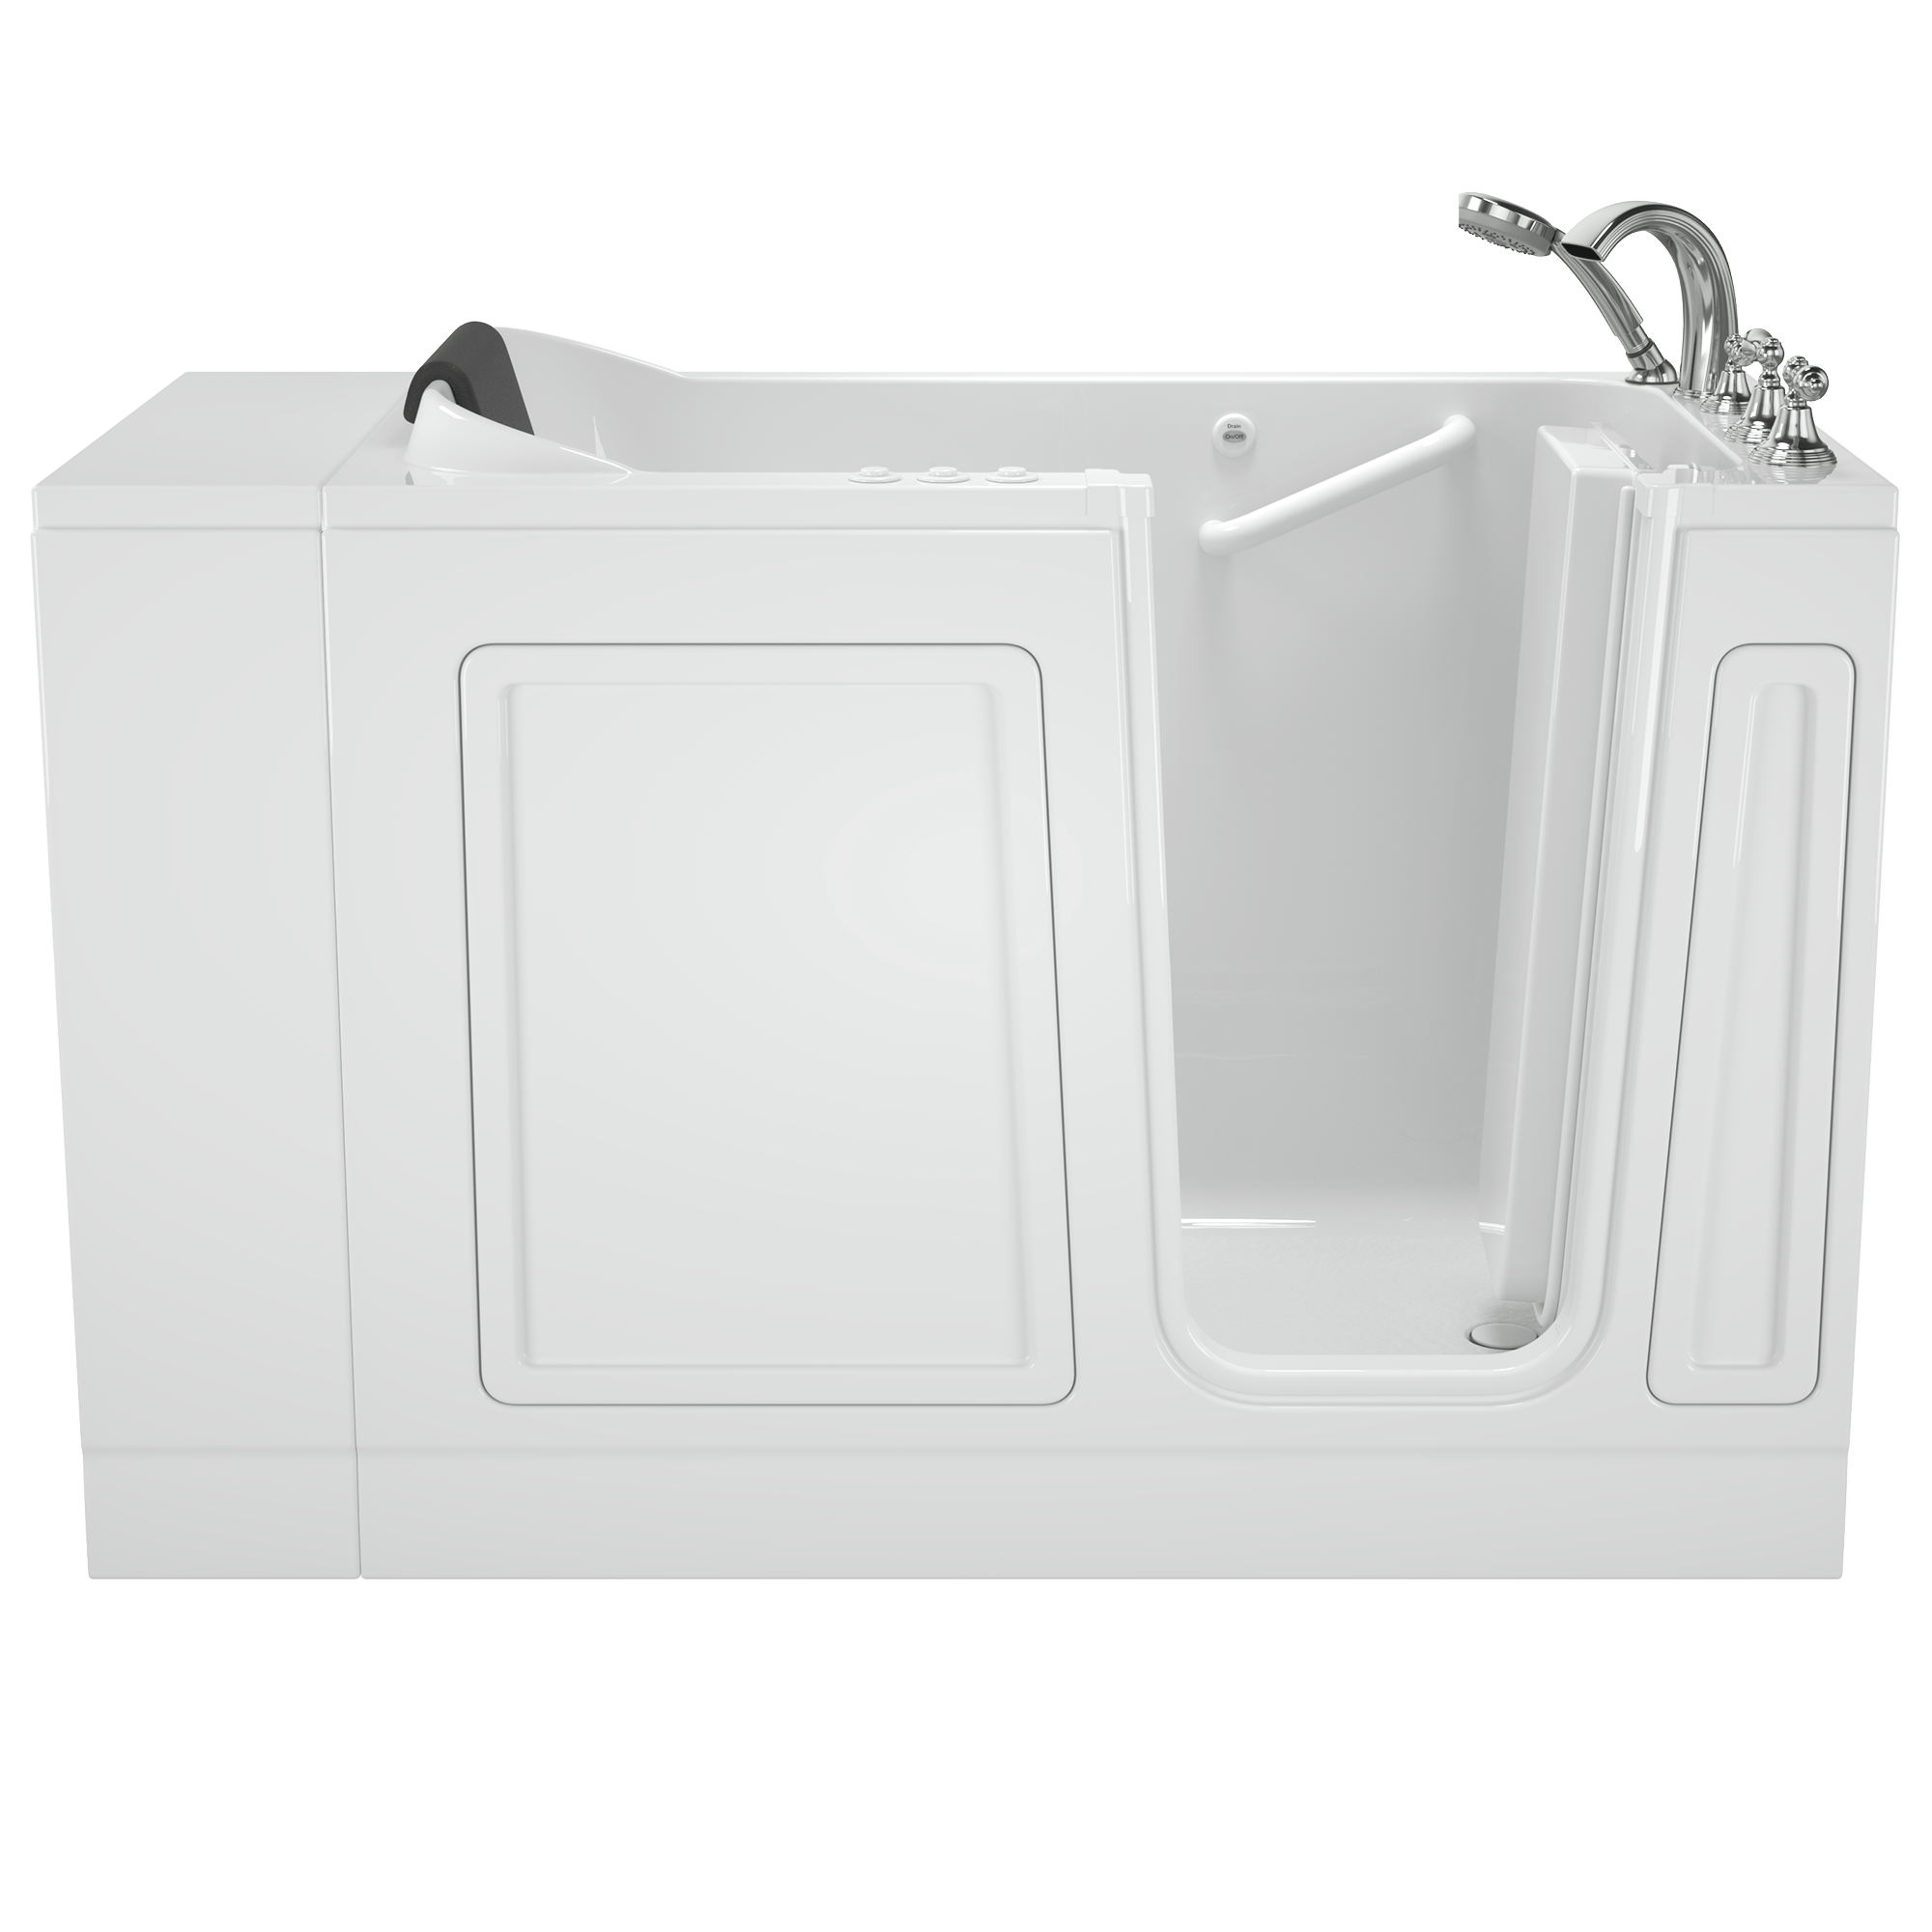 Acrylic Luxury Series 28 x 48 Inch Walk in Tub With Combination Air Spa and Whirlpool Systems   Right Hand Drain With Faucet WIB WHITE